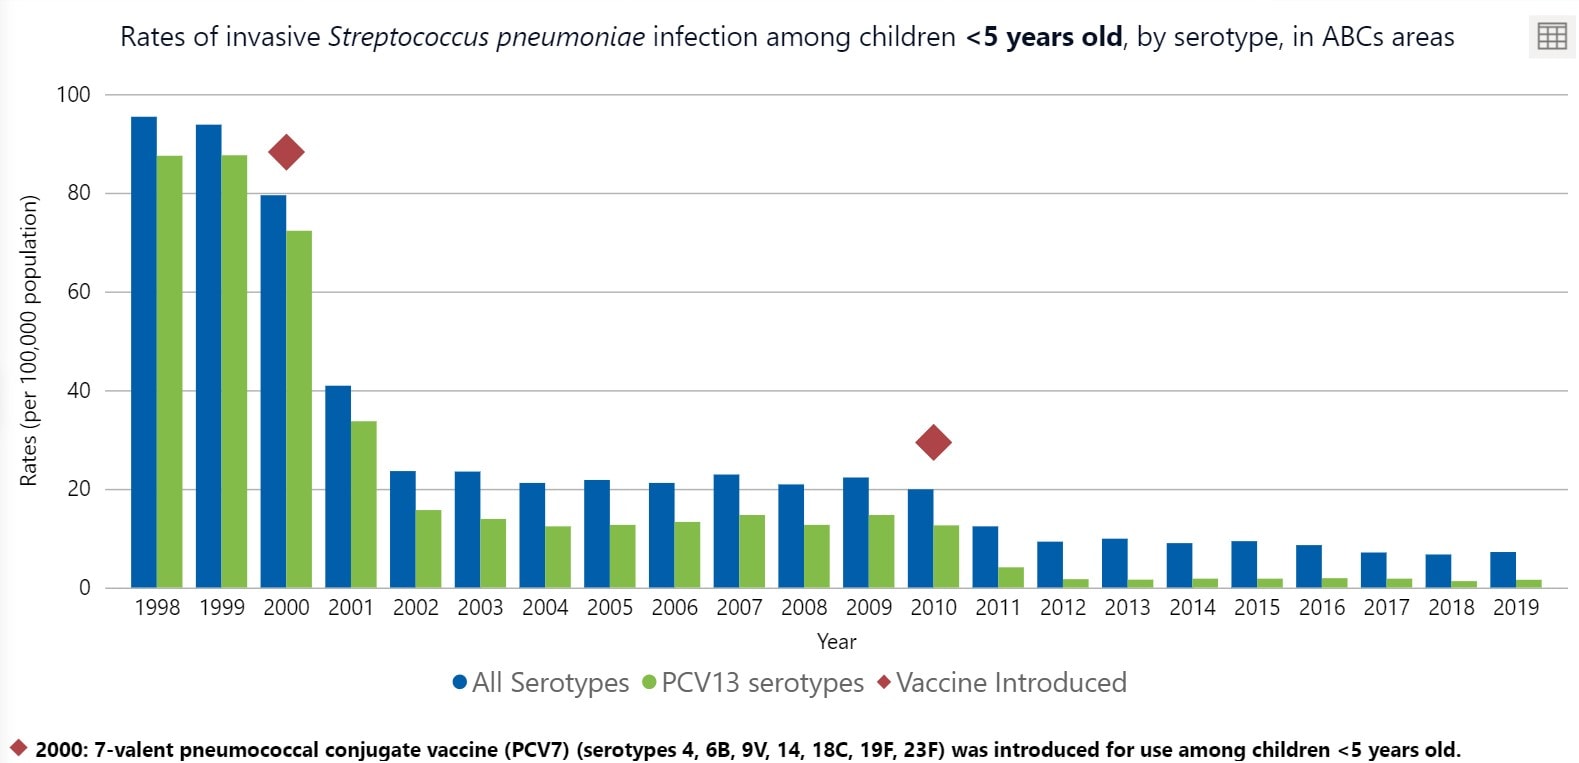 Bar chart: Rates of invasive Streptococcus pneumoniae infection among children under 5 years old, by serotype, in ABCs areas